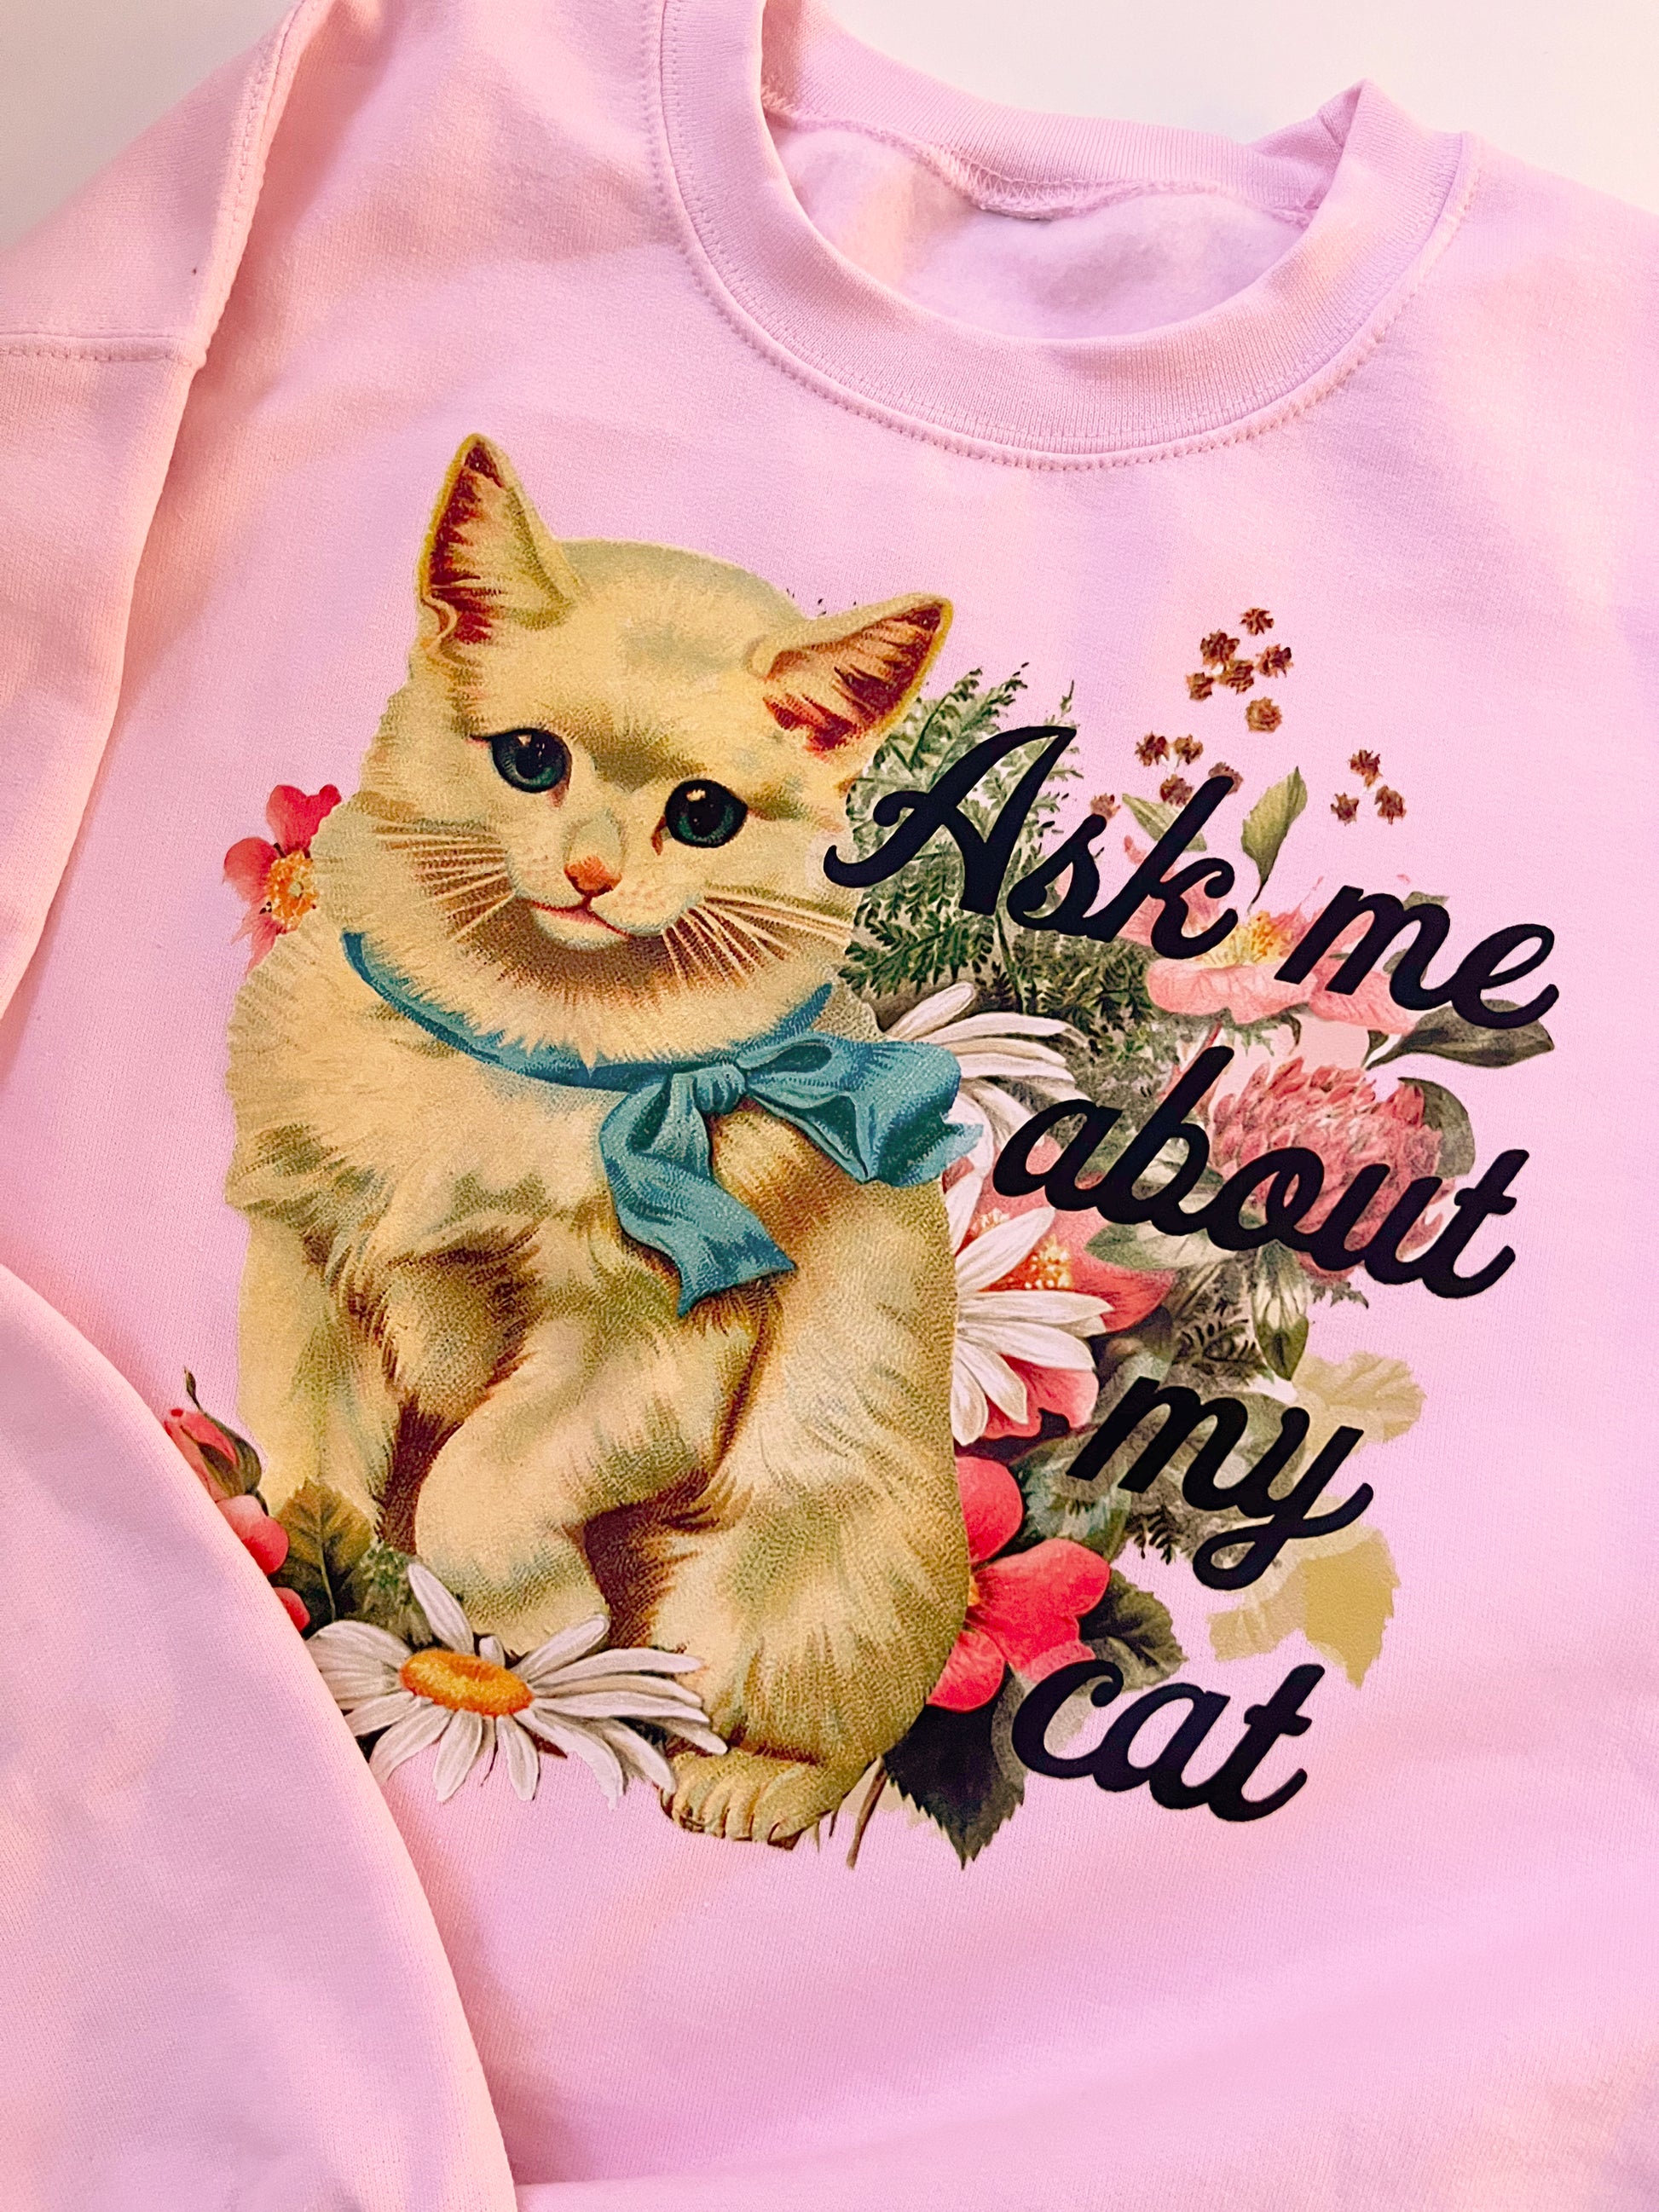 ask me about my cat sweatshirt cute 80s cat with flowers pink sweater cozy oversized sweats funny cat mom gift coin laundry